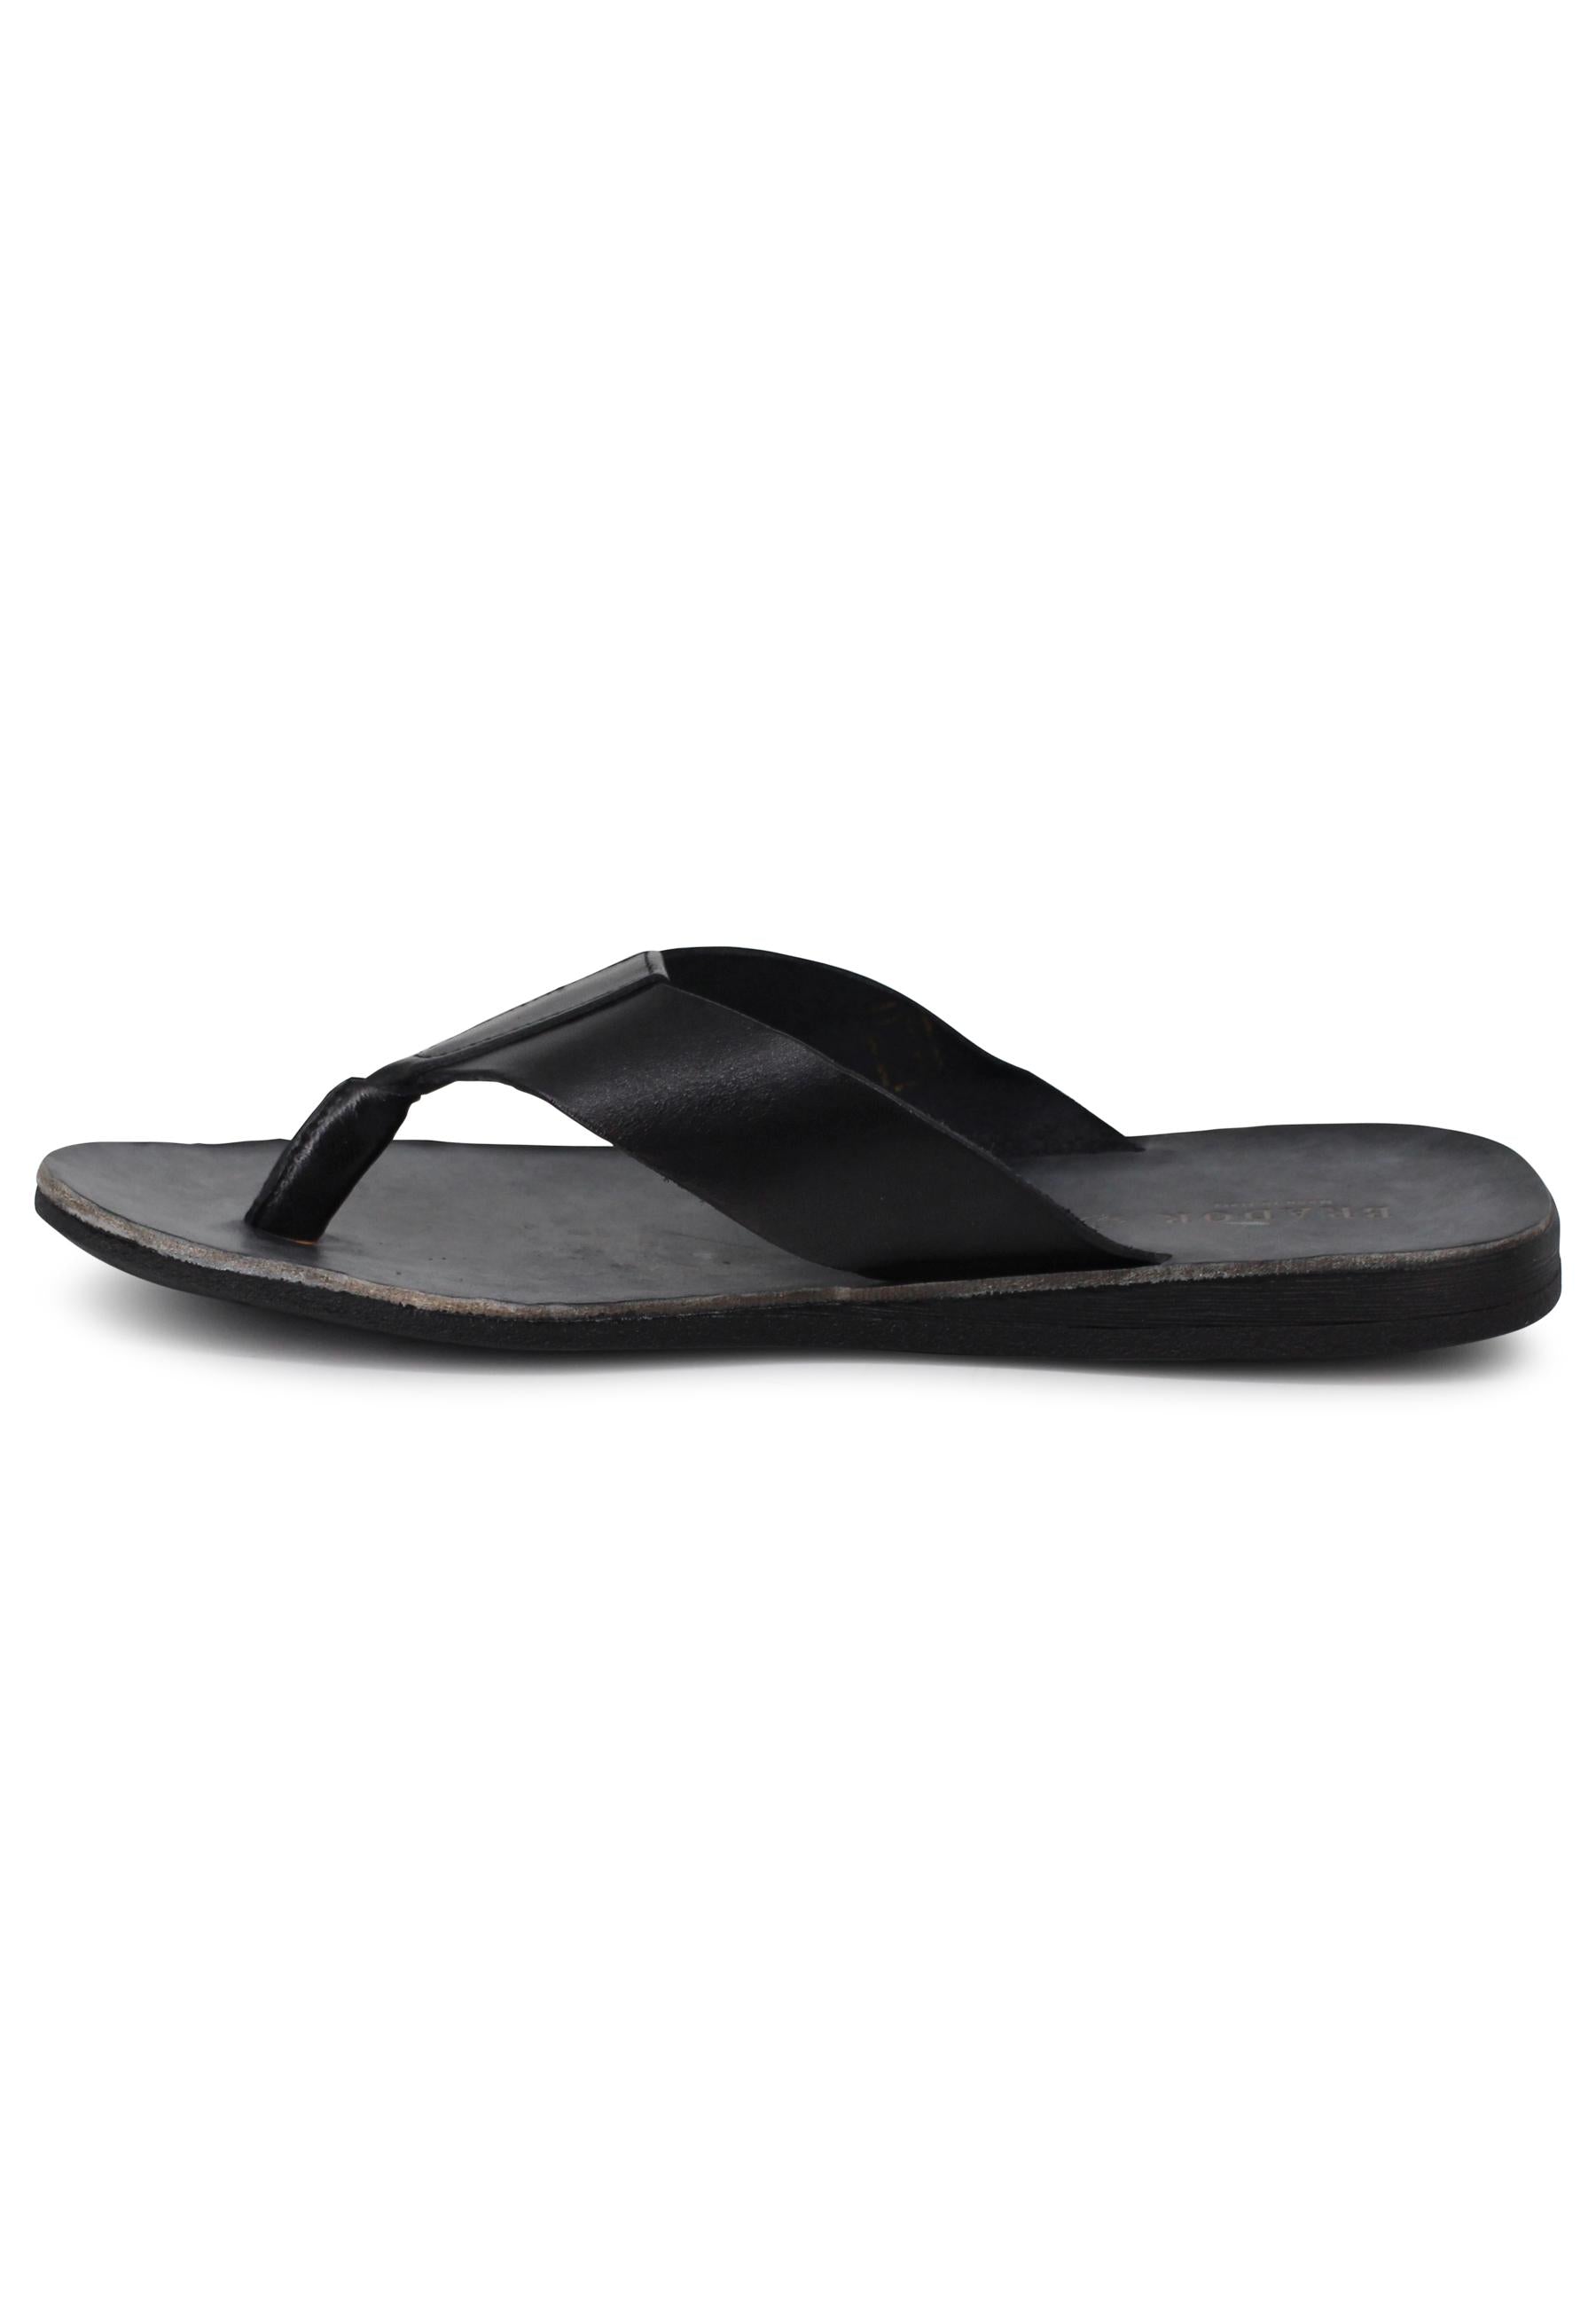 Men's flip-flop sandals in black leather with rubber sole